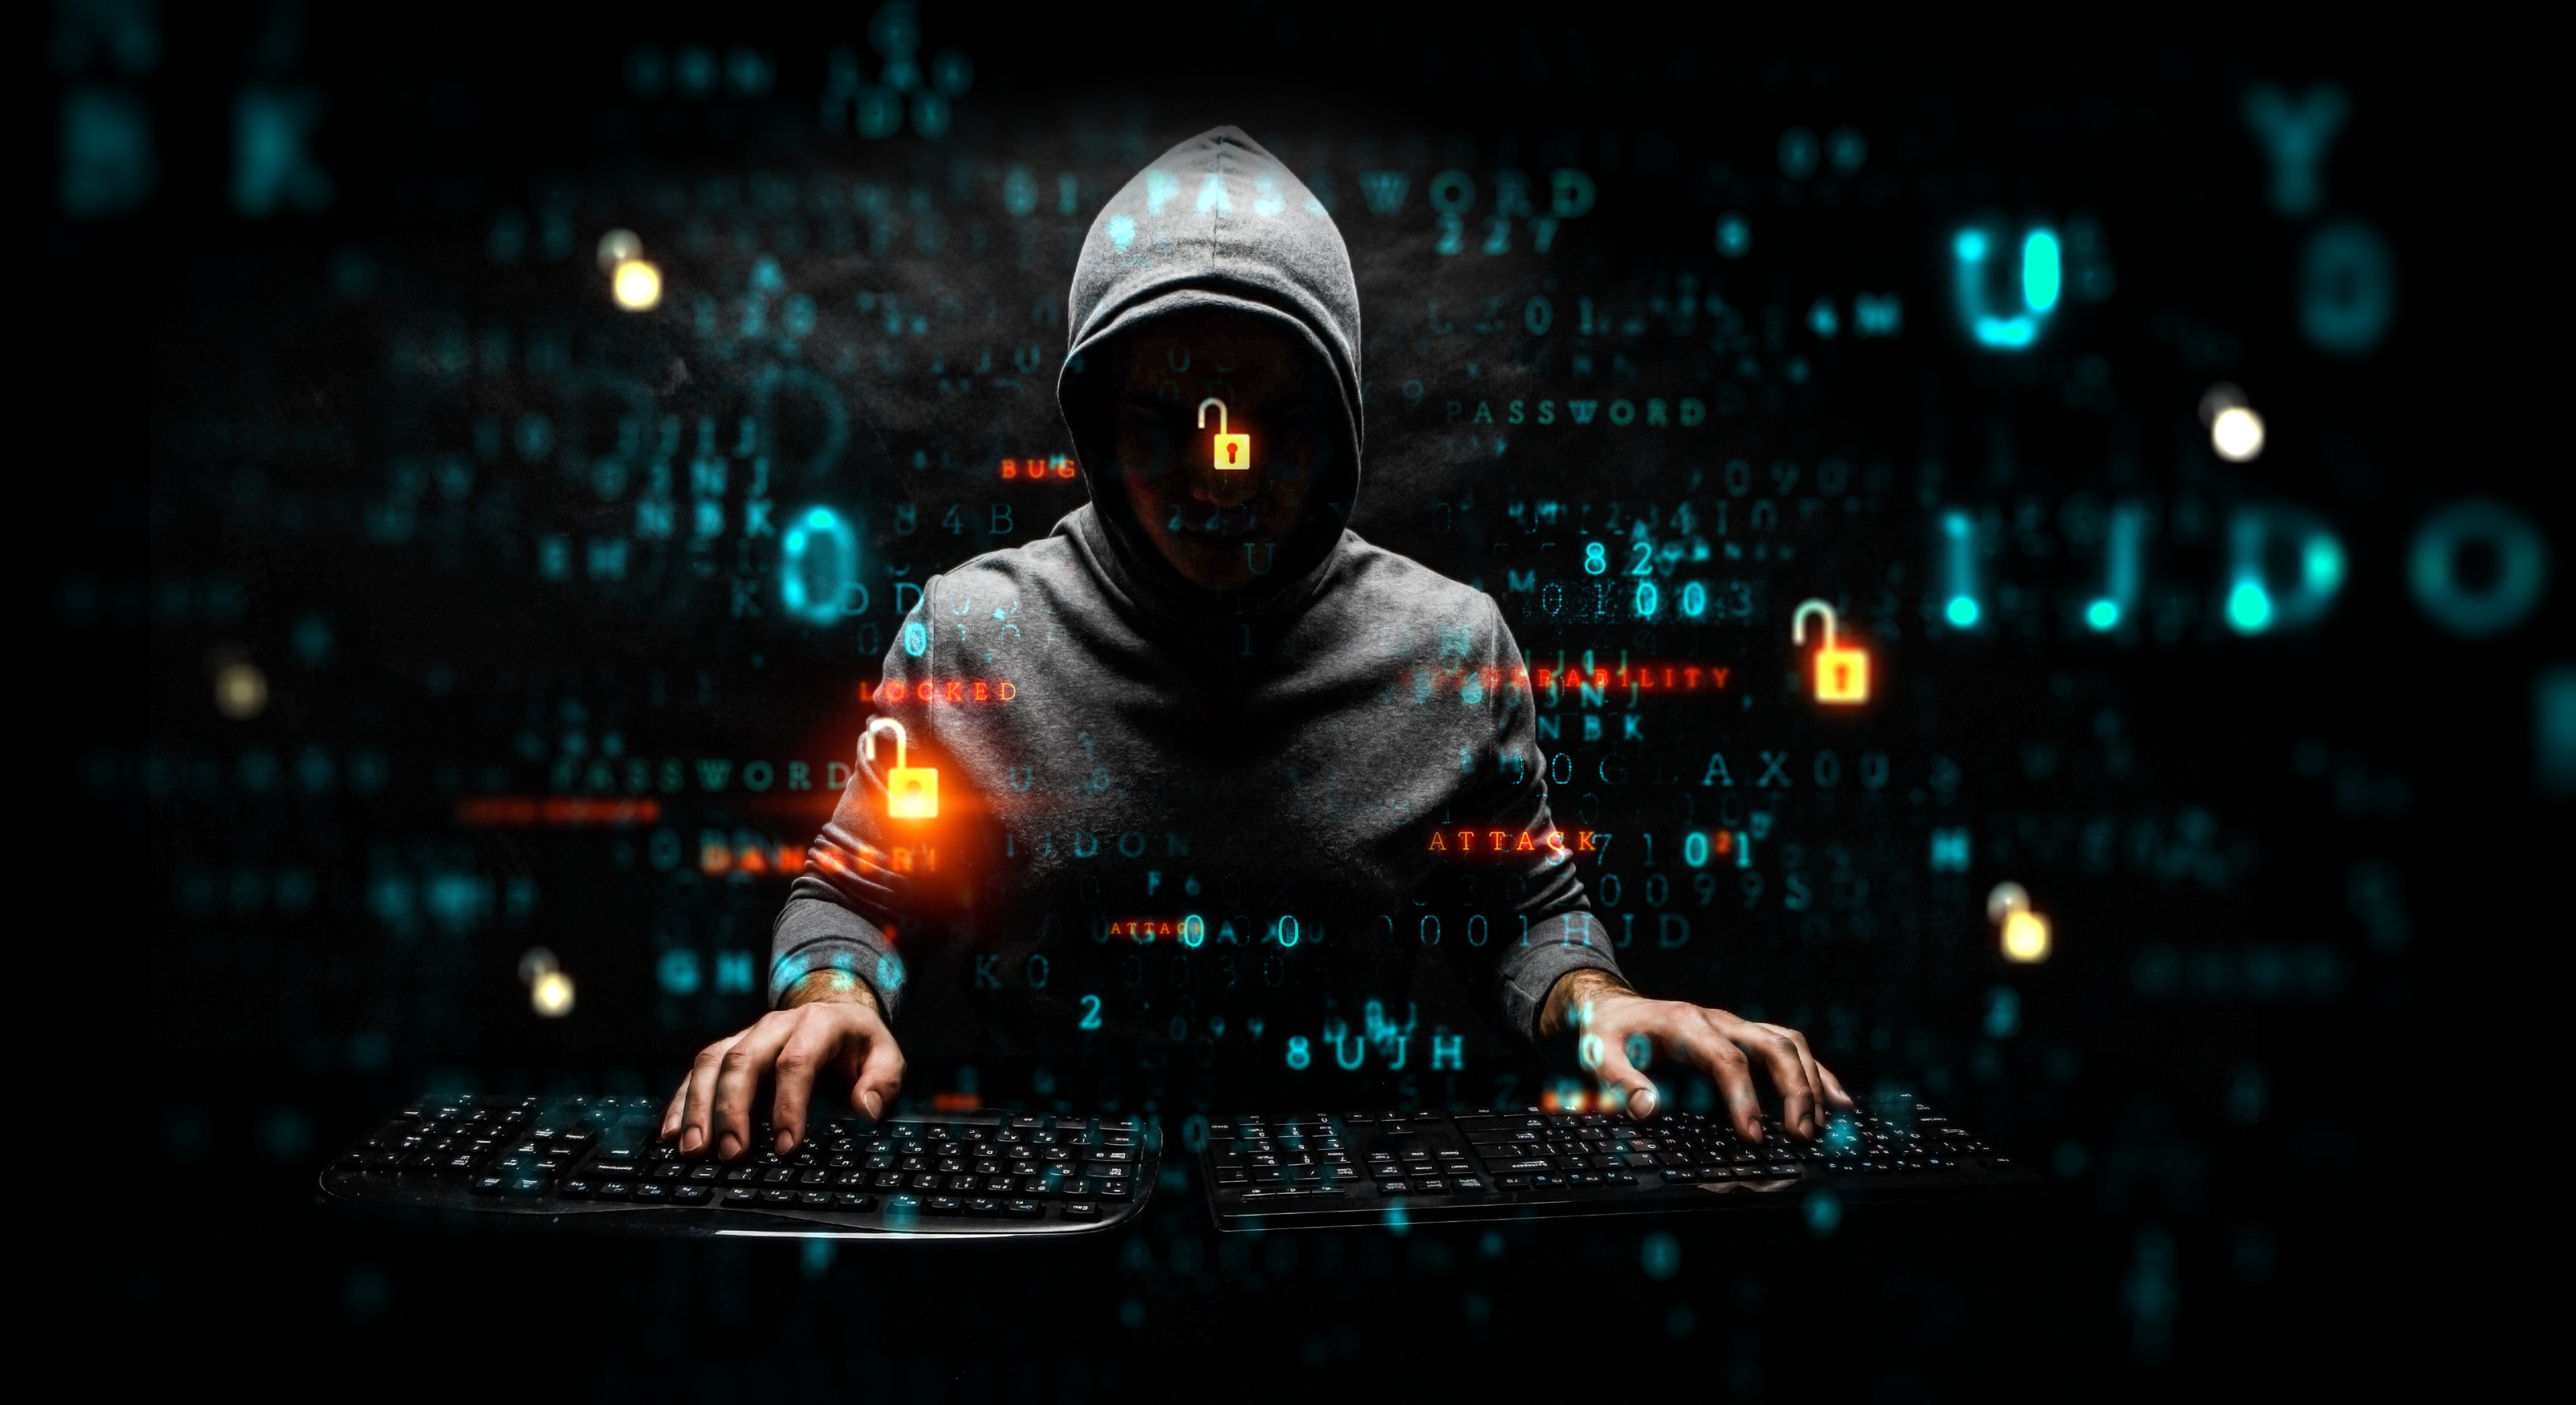 More than US$27 trillion worth of cryptocurrency has been stolen in 827 attacks since 2012, according to Xiamen-based blockchain security firm SlowMist. Photo: Shutterstock